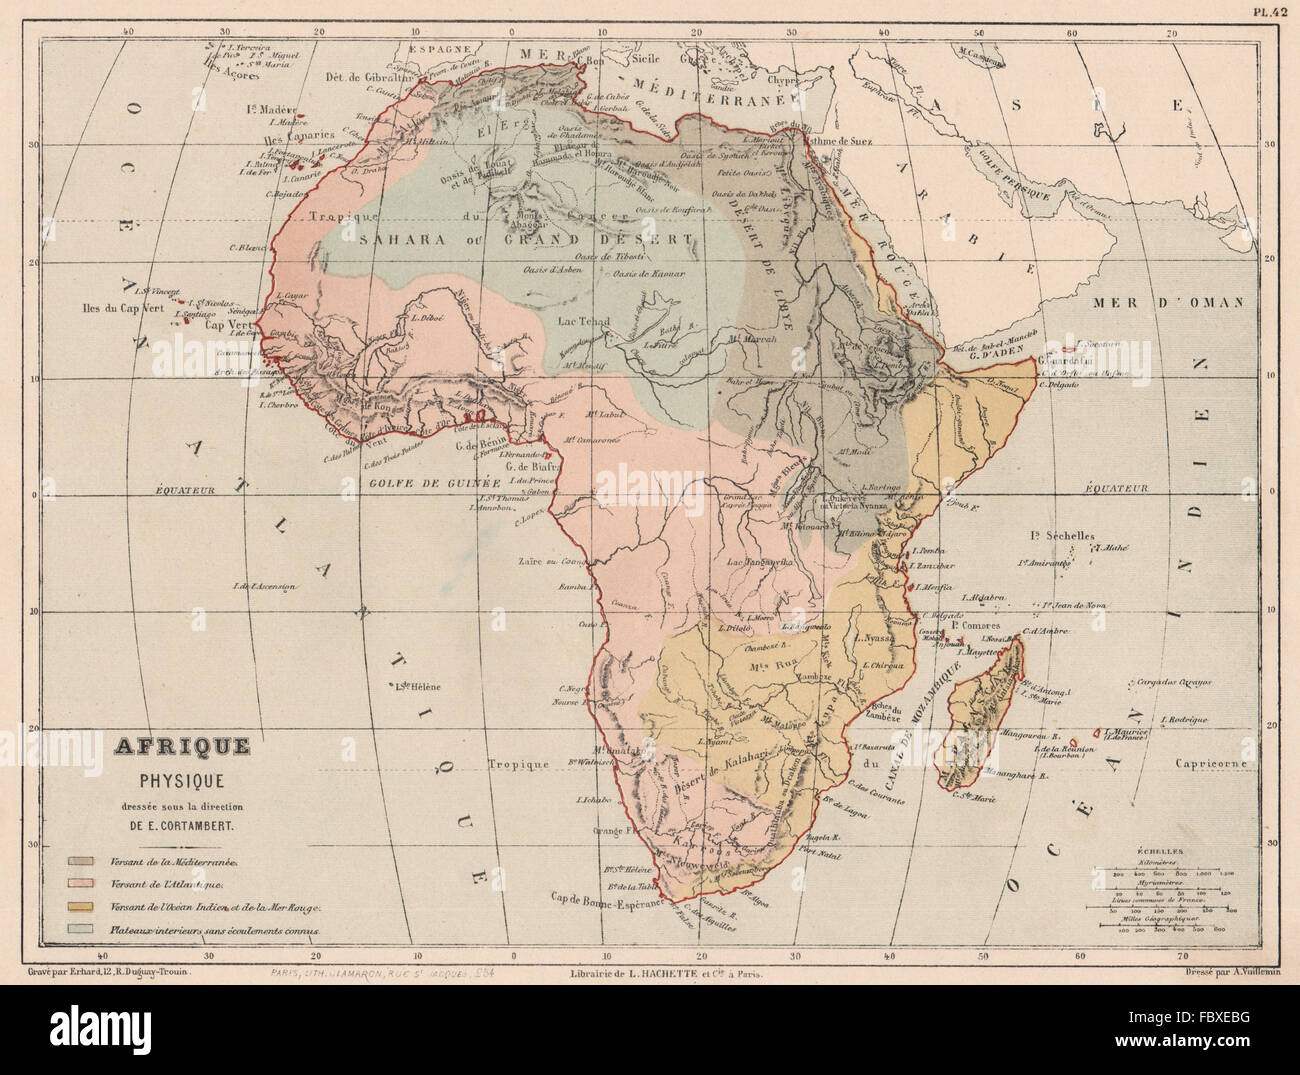 AFRICA WATERSHEDS/drainage divides Atlantic Indian Oceans Mediterranean 1880 map Stock Photo